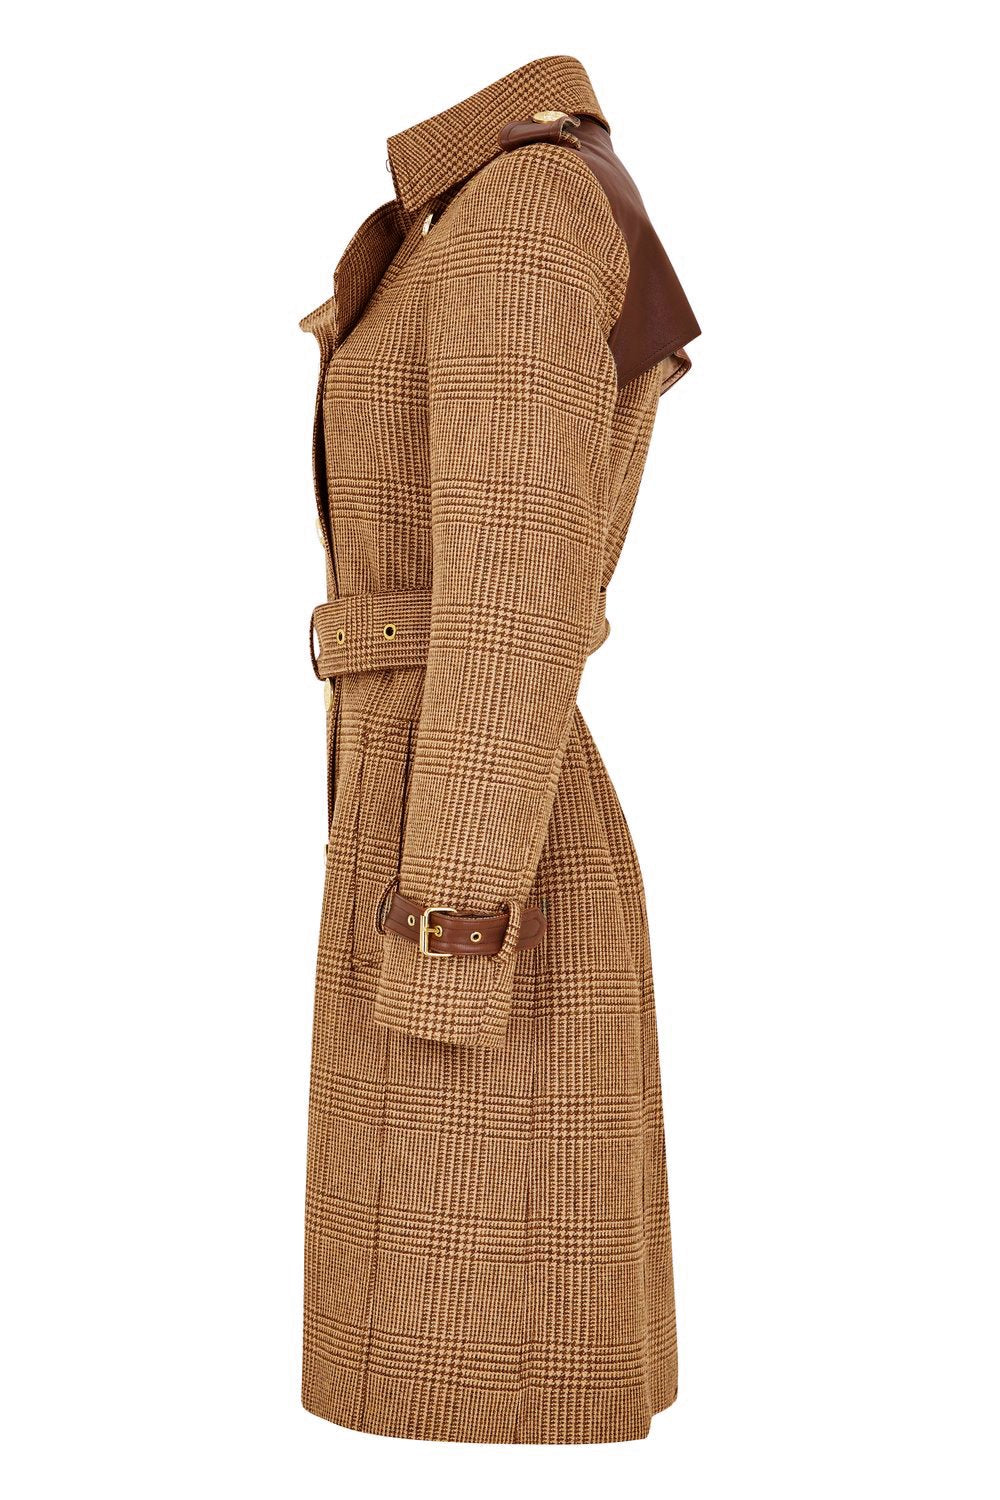 side of womens tawny light tan detailed with gold hardware knee length wool trench coat